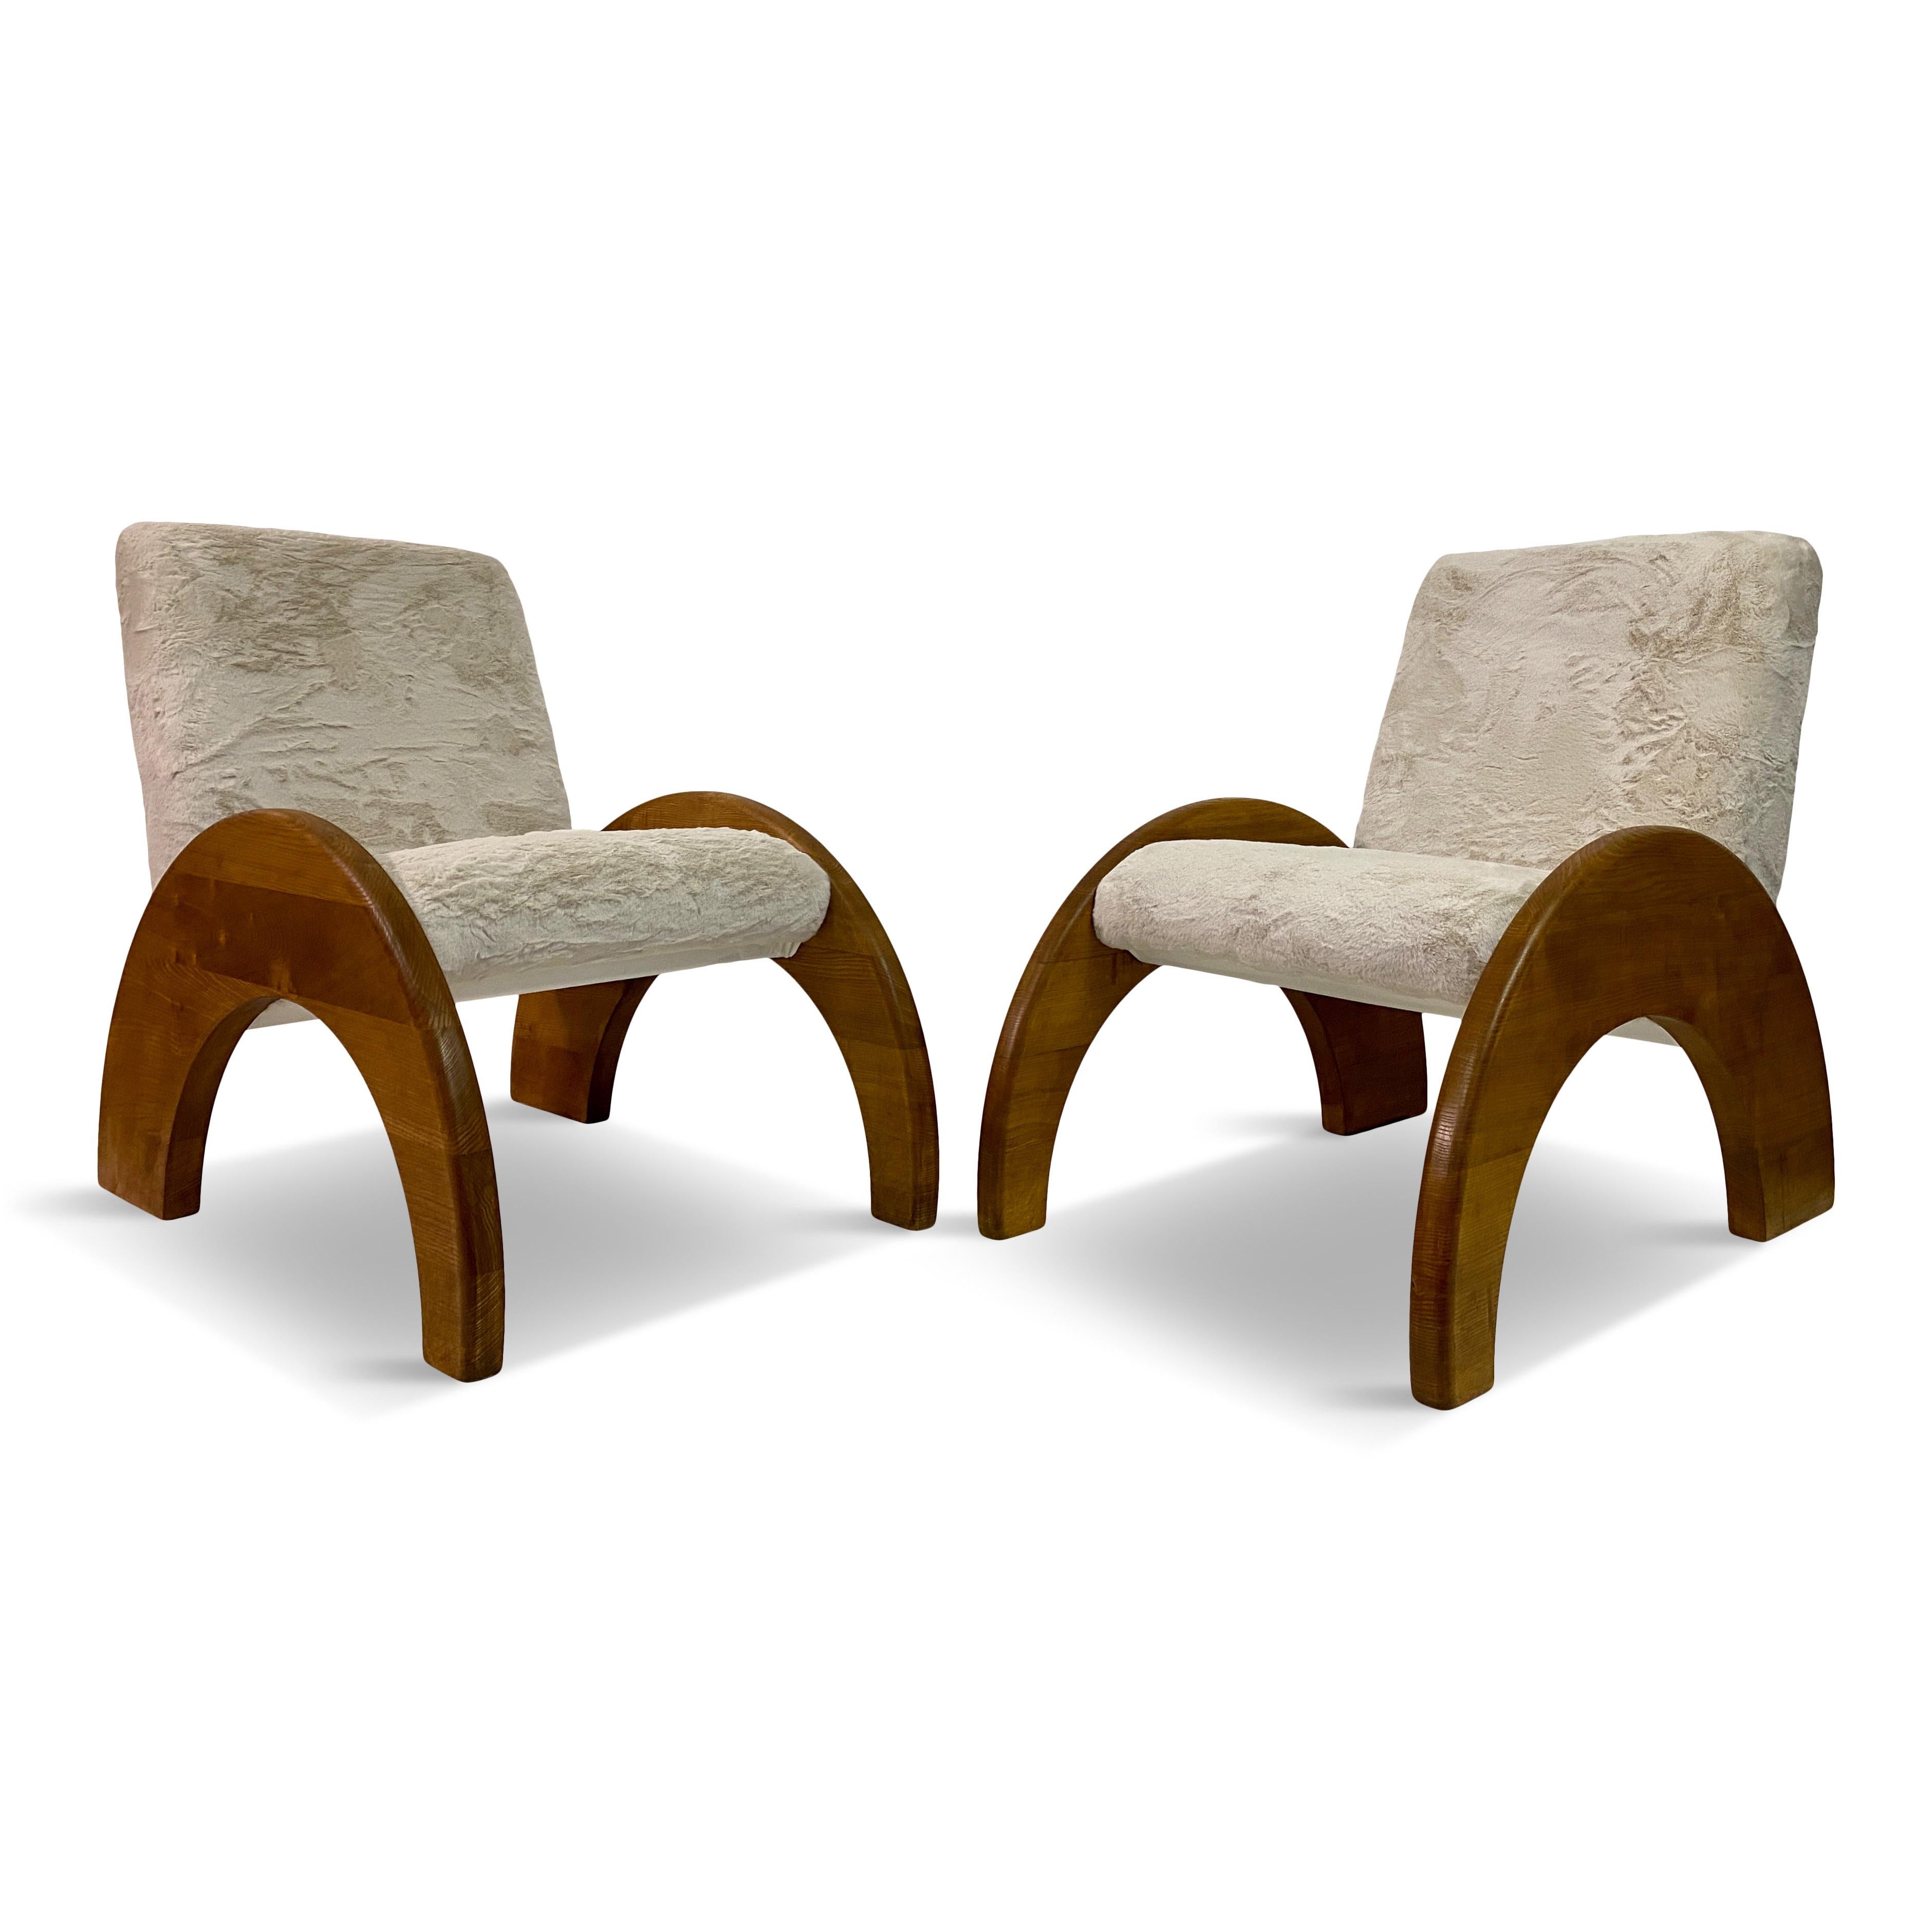 Pair of armchairs

Arched arms and legs

Fake fur upholstery

Seat height 46cm

Contemporary Italy

These in stock but more can be made to order.